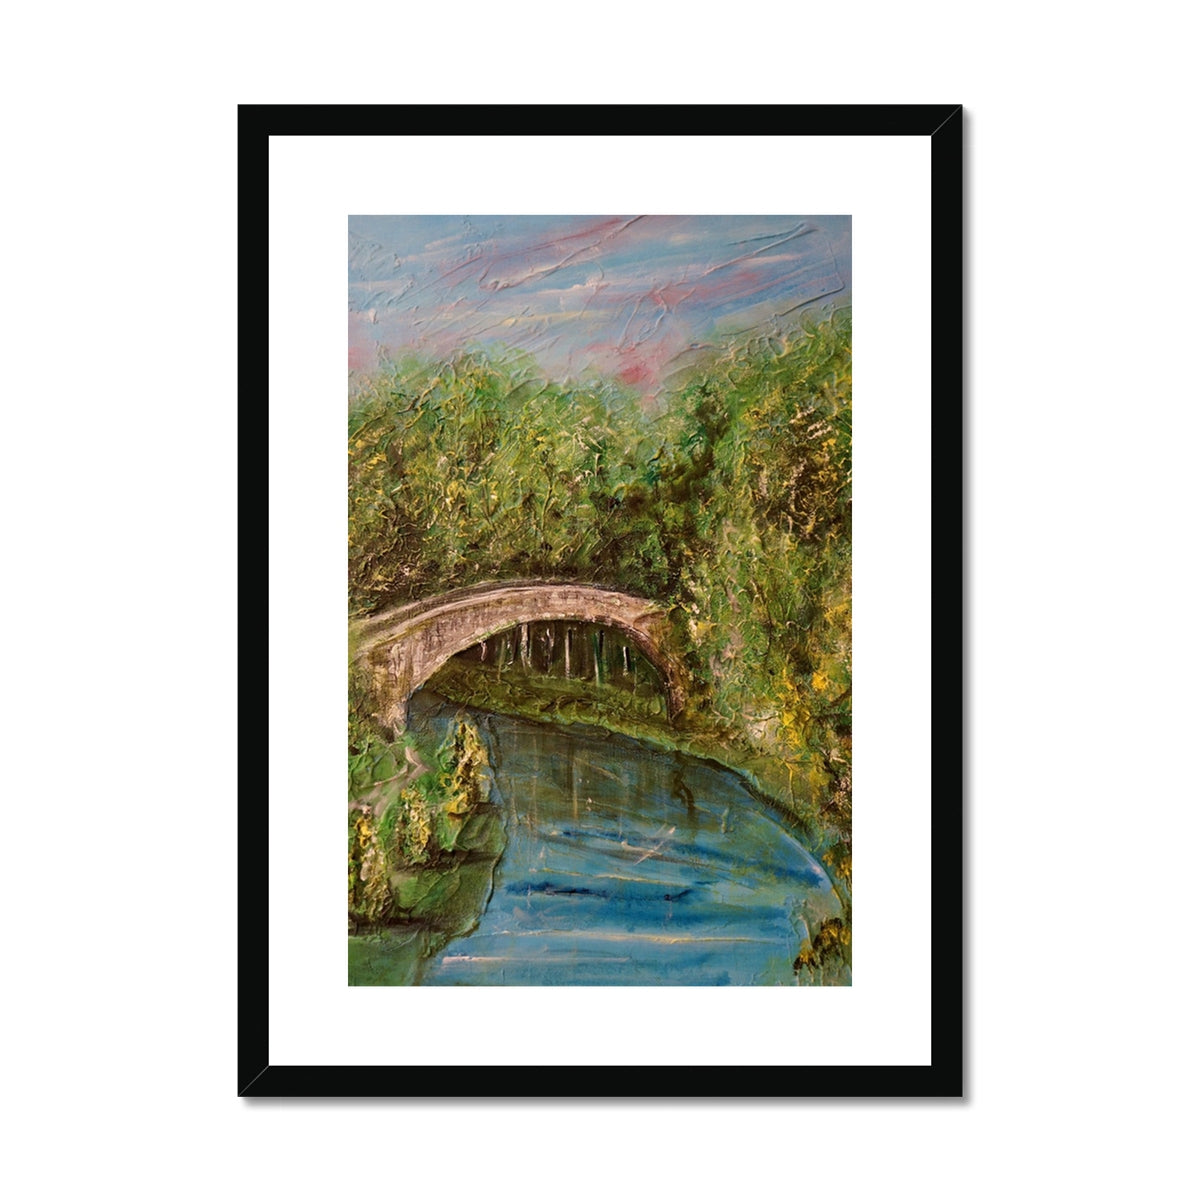 The Brig O Doon Painting | Framed & Mounted Prints From Scotland-Framed & Mounted Prints-Historic & Iconic Scotland Art Gallery-A2 Portrait-Black Frame-Paintings, Prints, Homeware, Art Gifts From Scotland By Scottish Artist Kevin Hunter